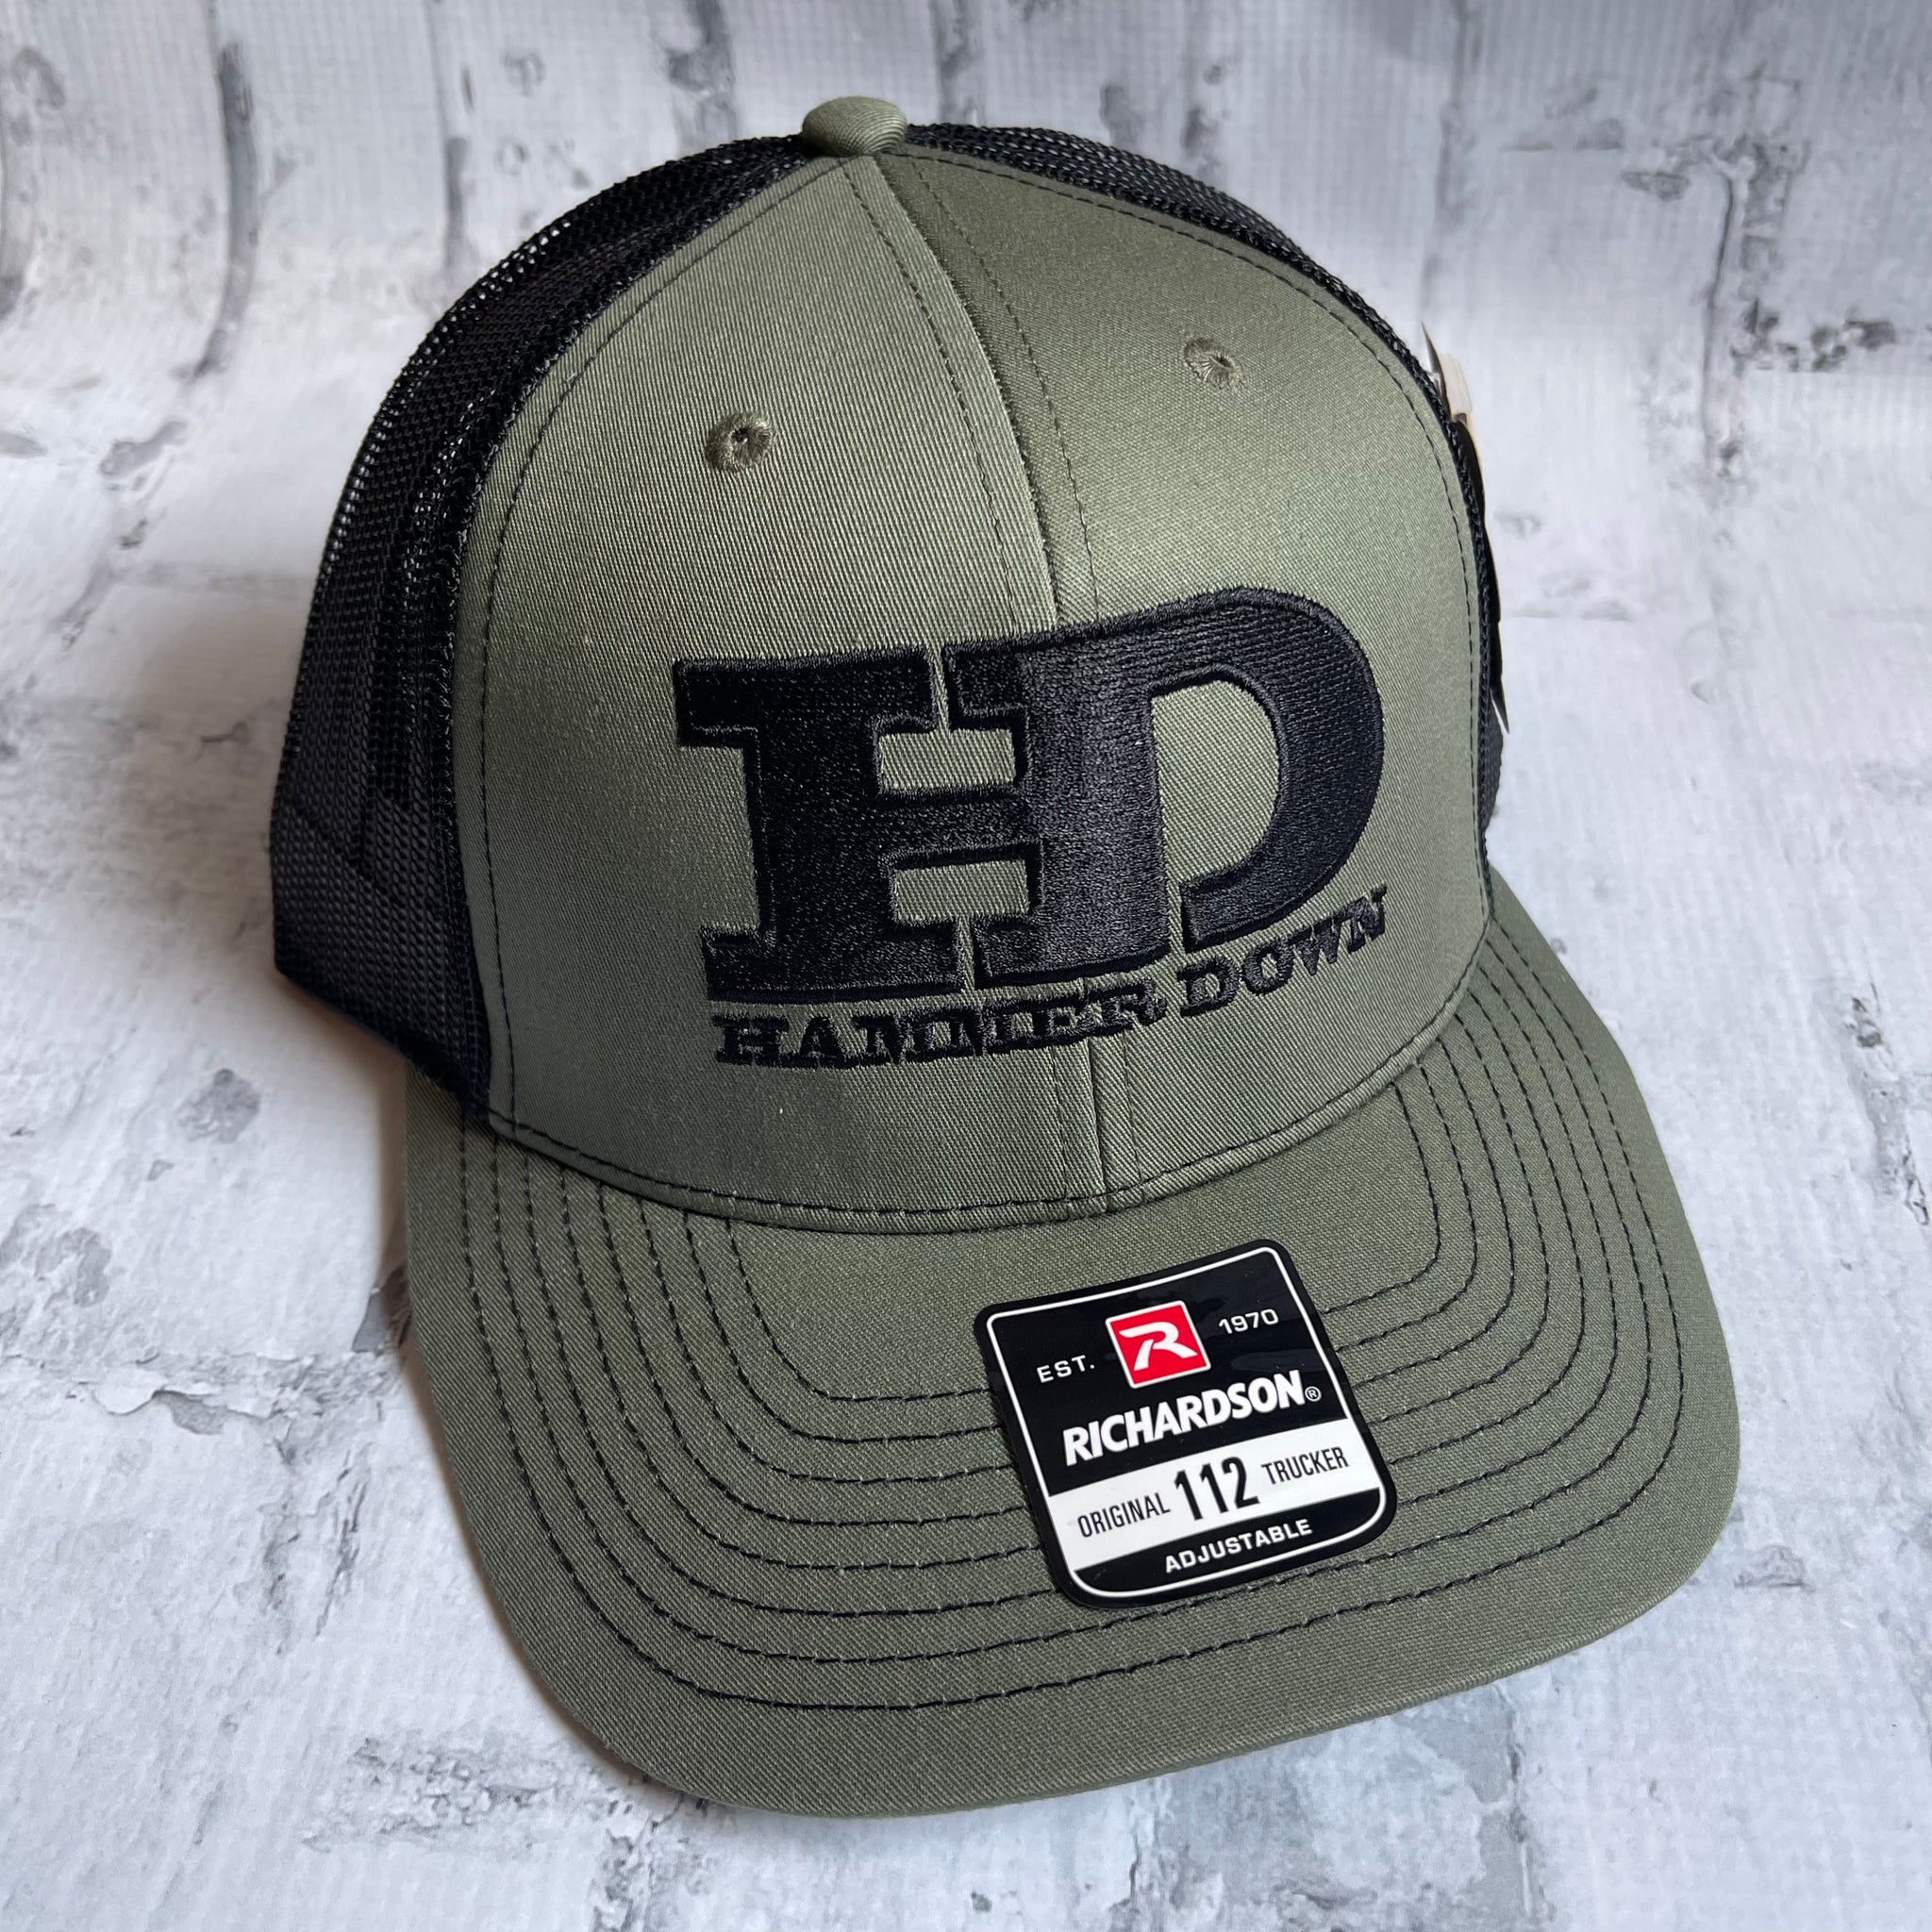 Hammer Down "HD Original" Hat - Loden with Woven Patch - Southern Charm "Shop The Charm"